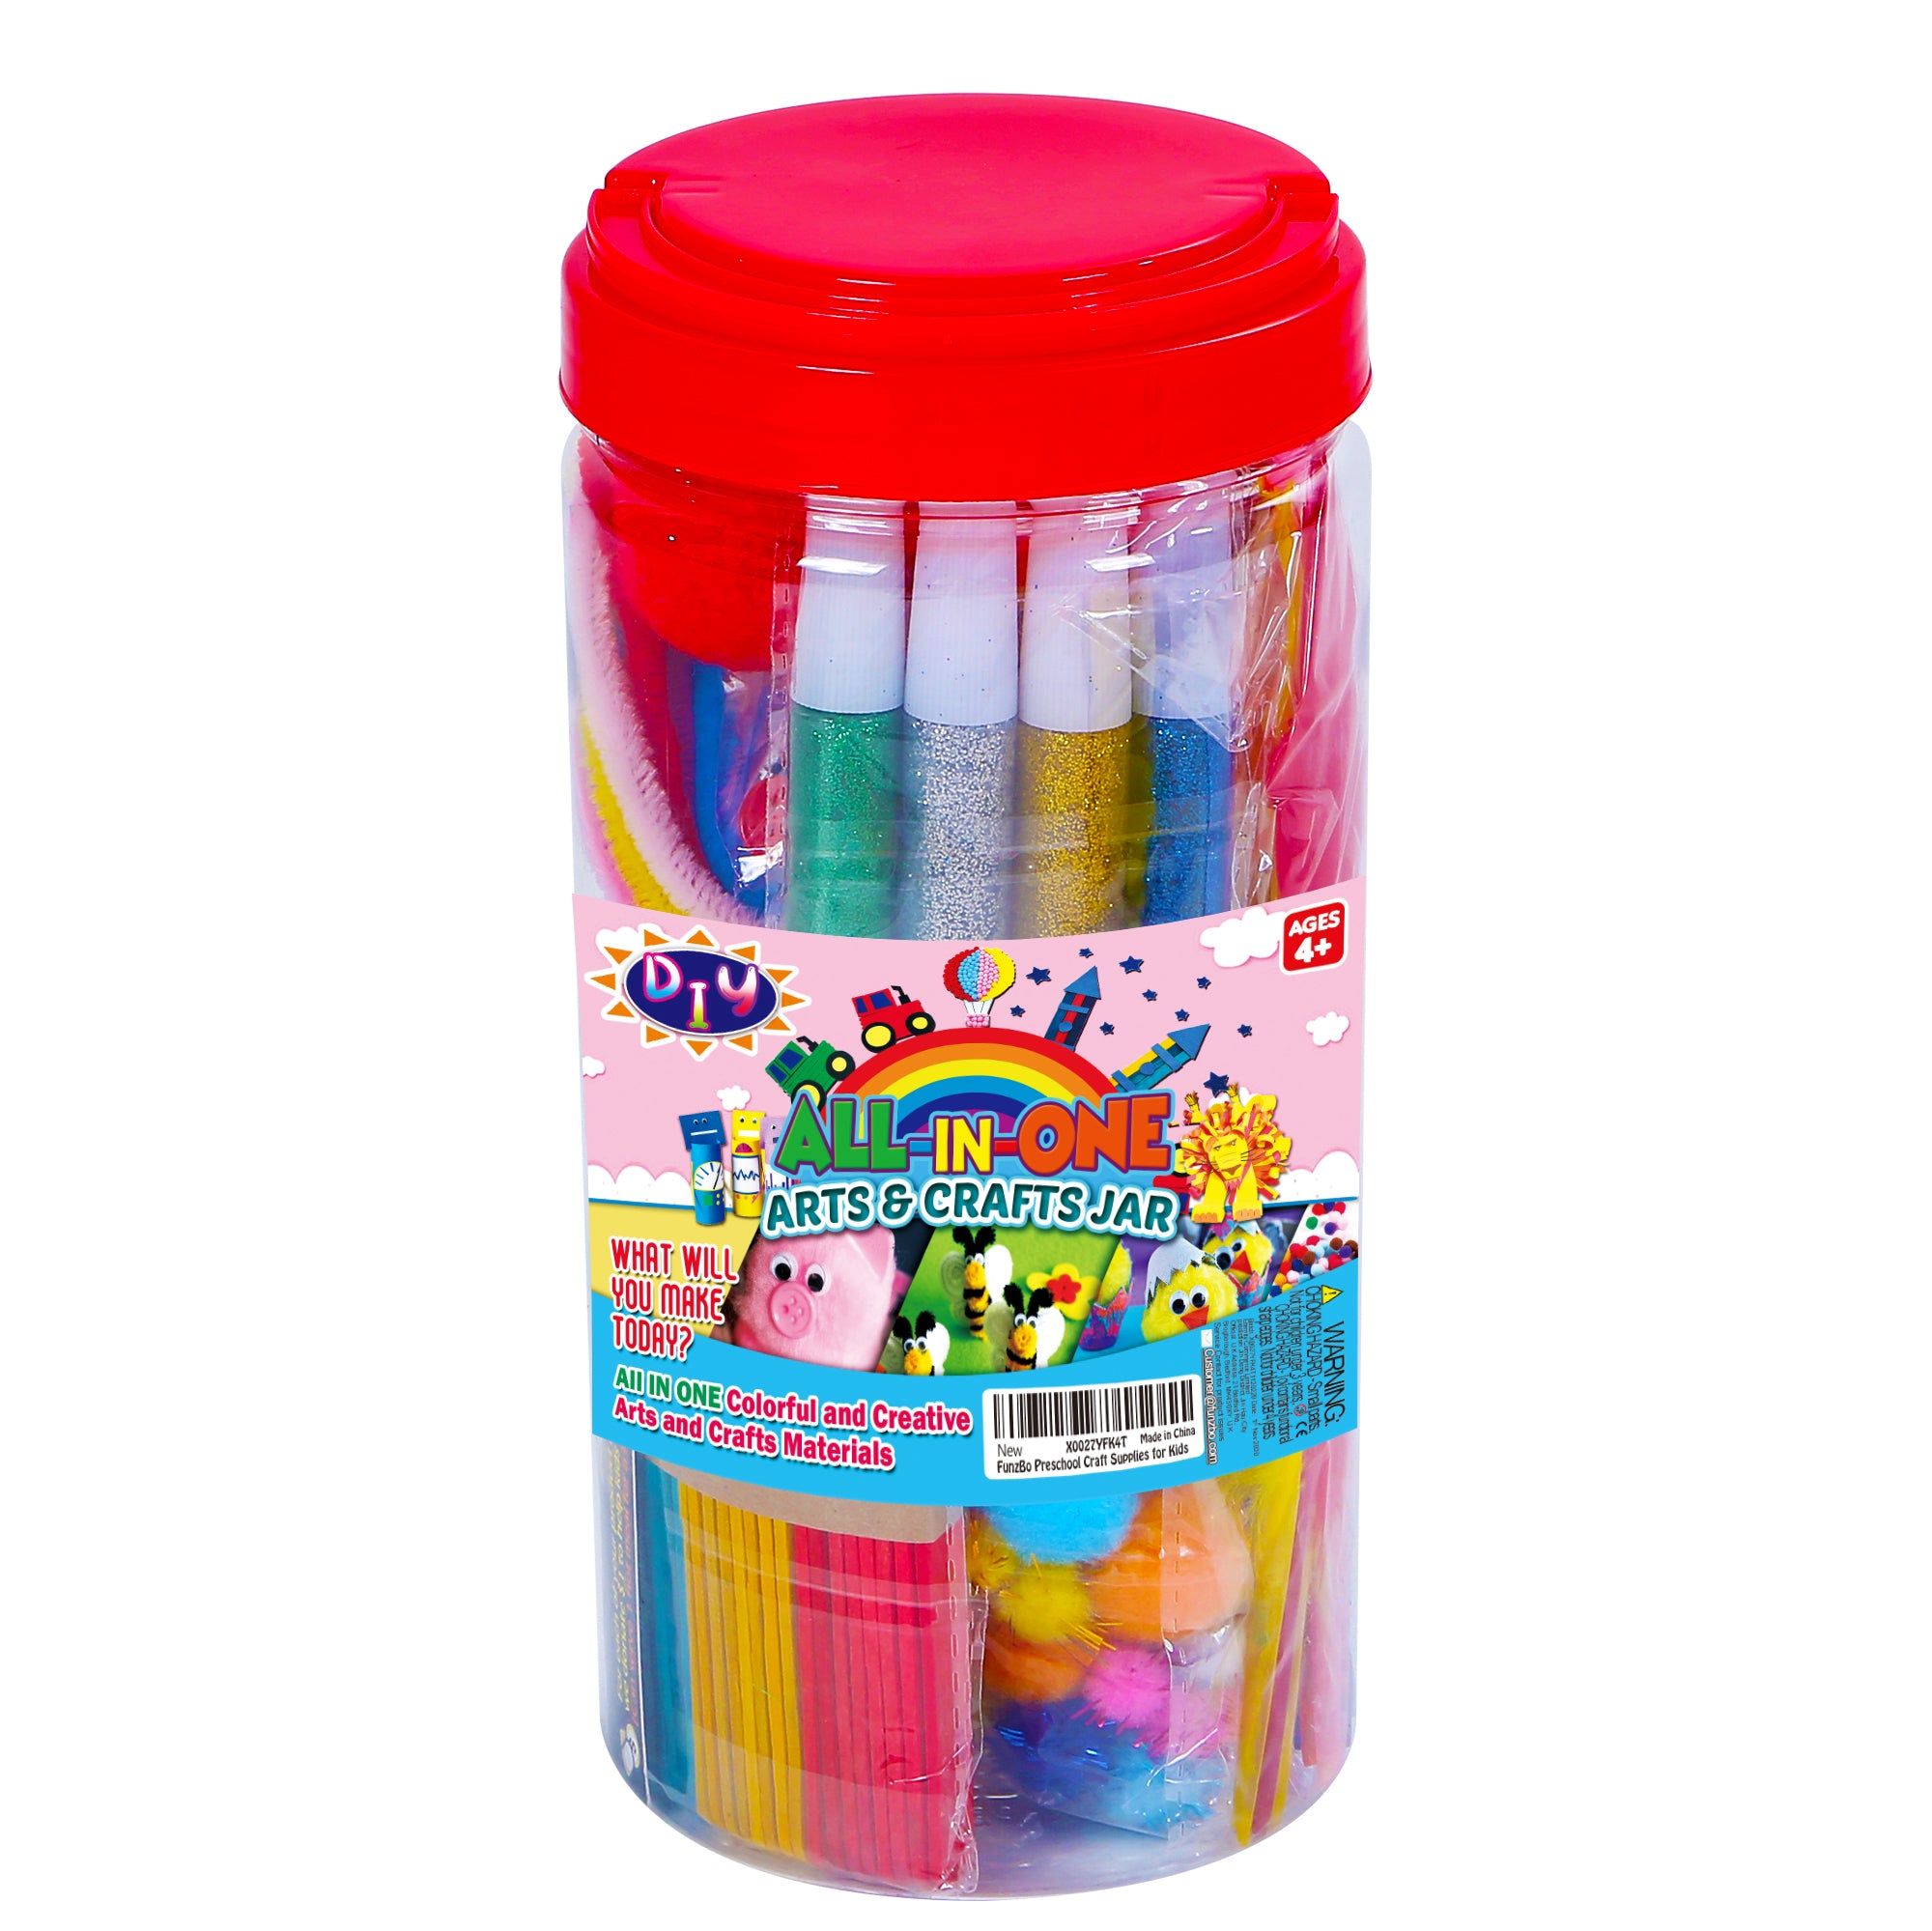 FunzBo FUNZBO Arts and Crafts Supplies for Kids - Kids Crafts for